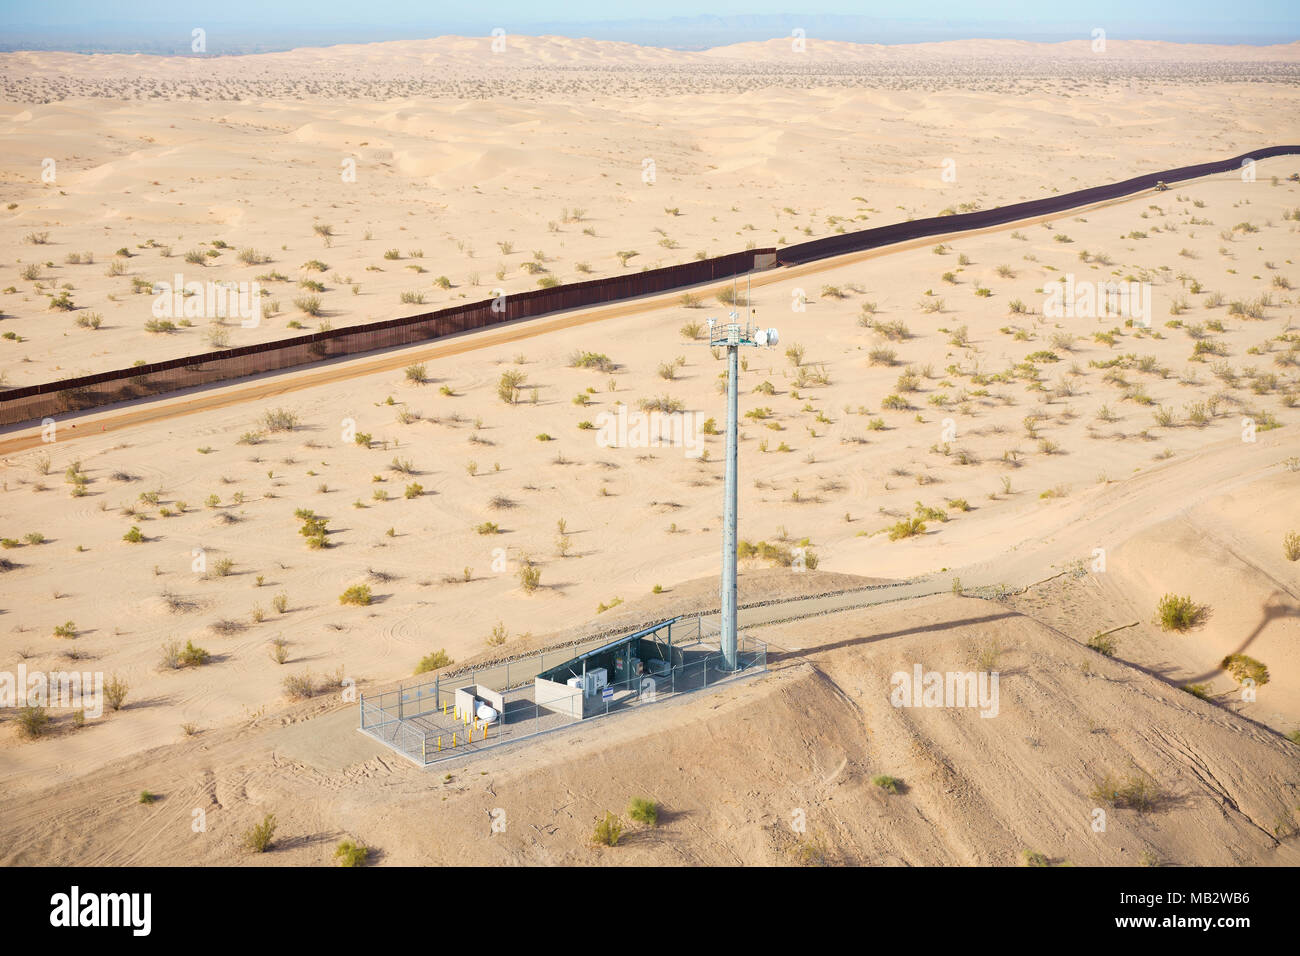 AERIAL VIEW. High-tech equipment on a mound used for surveillance of the Mexico / U.S. border. Algodones Sand Dunes in the Sonoran Desert. Stock Photo